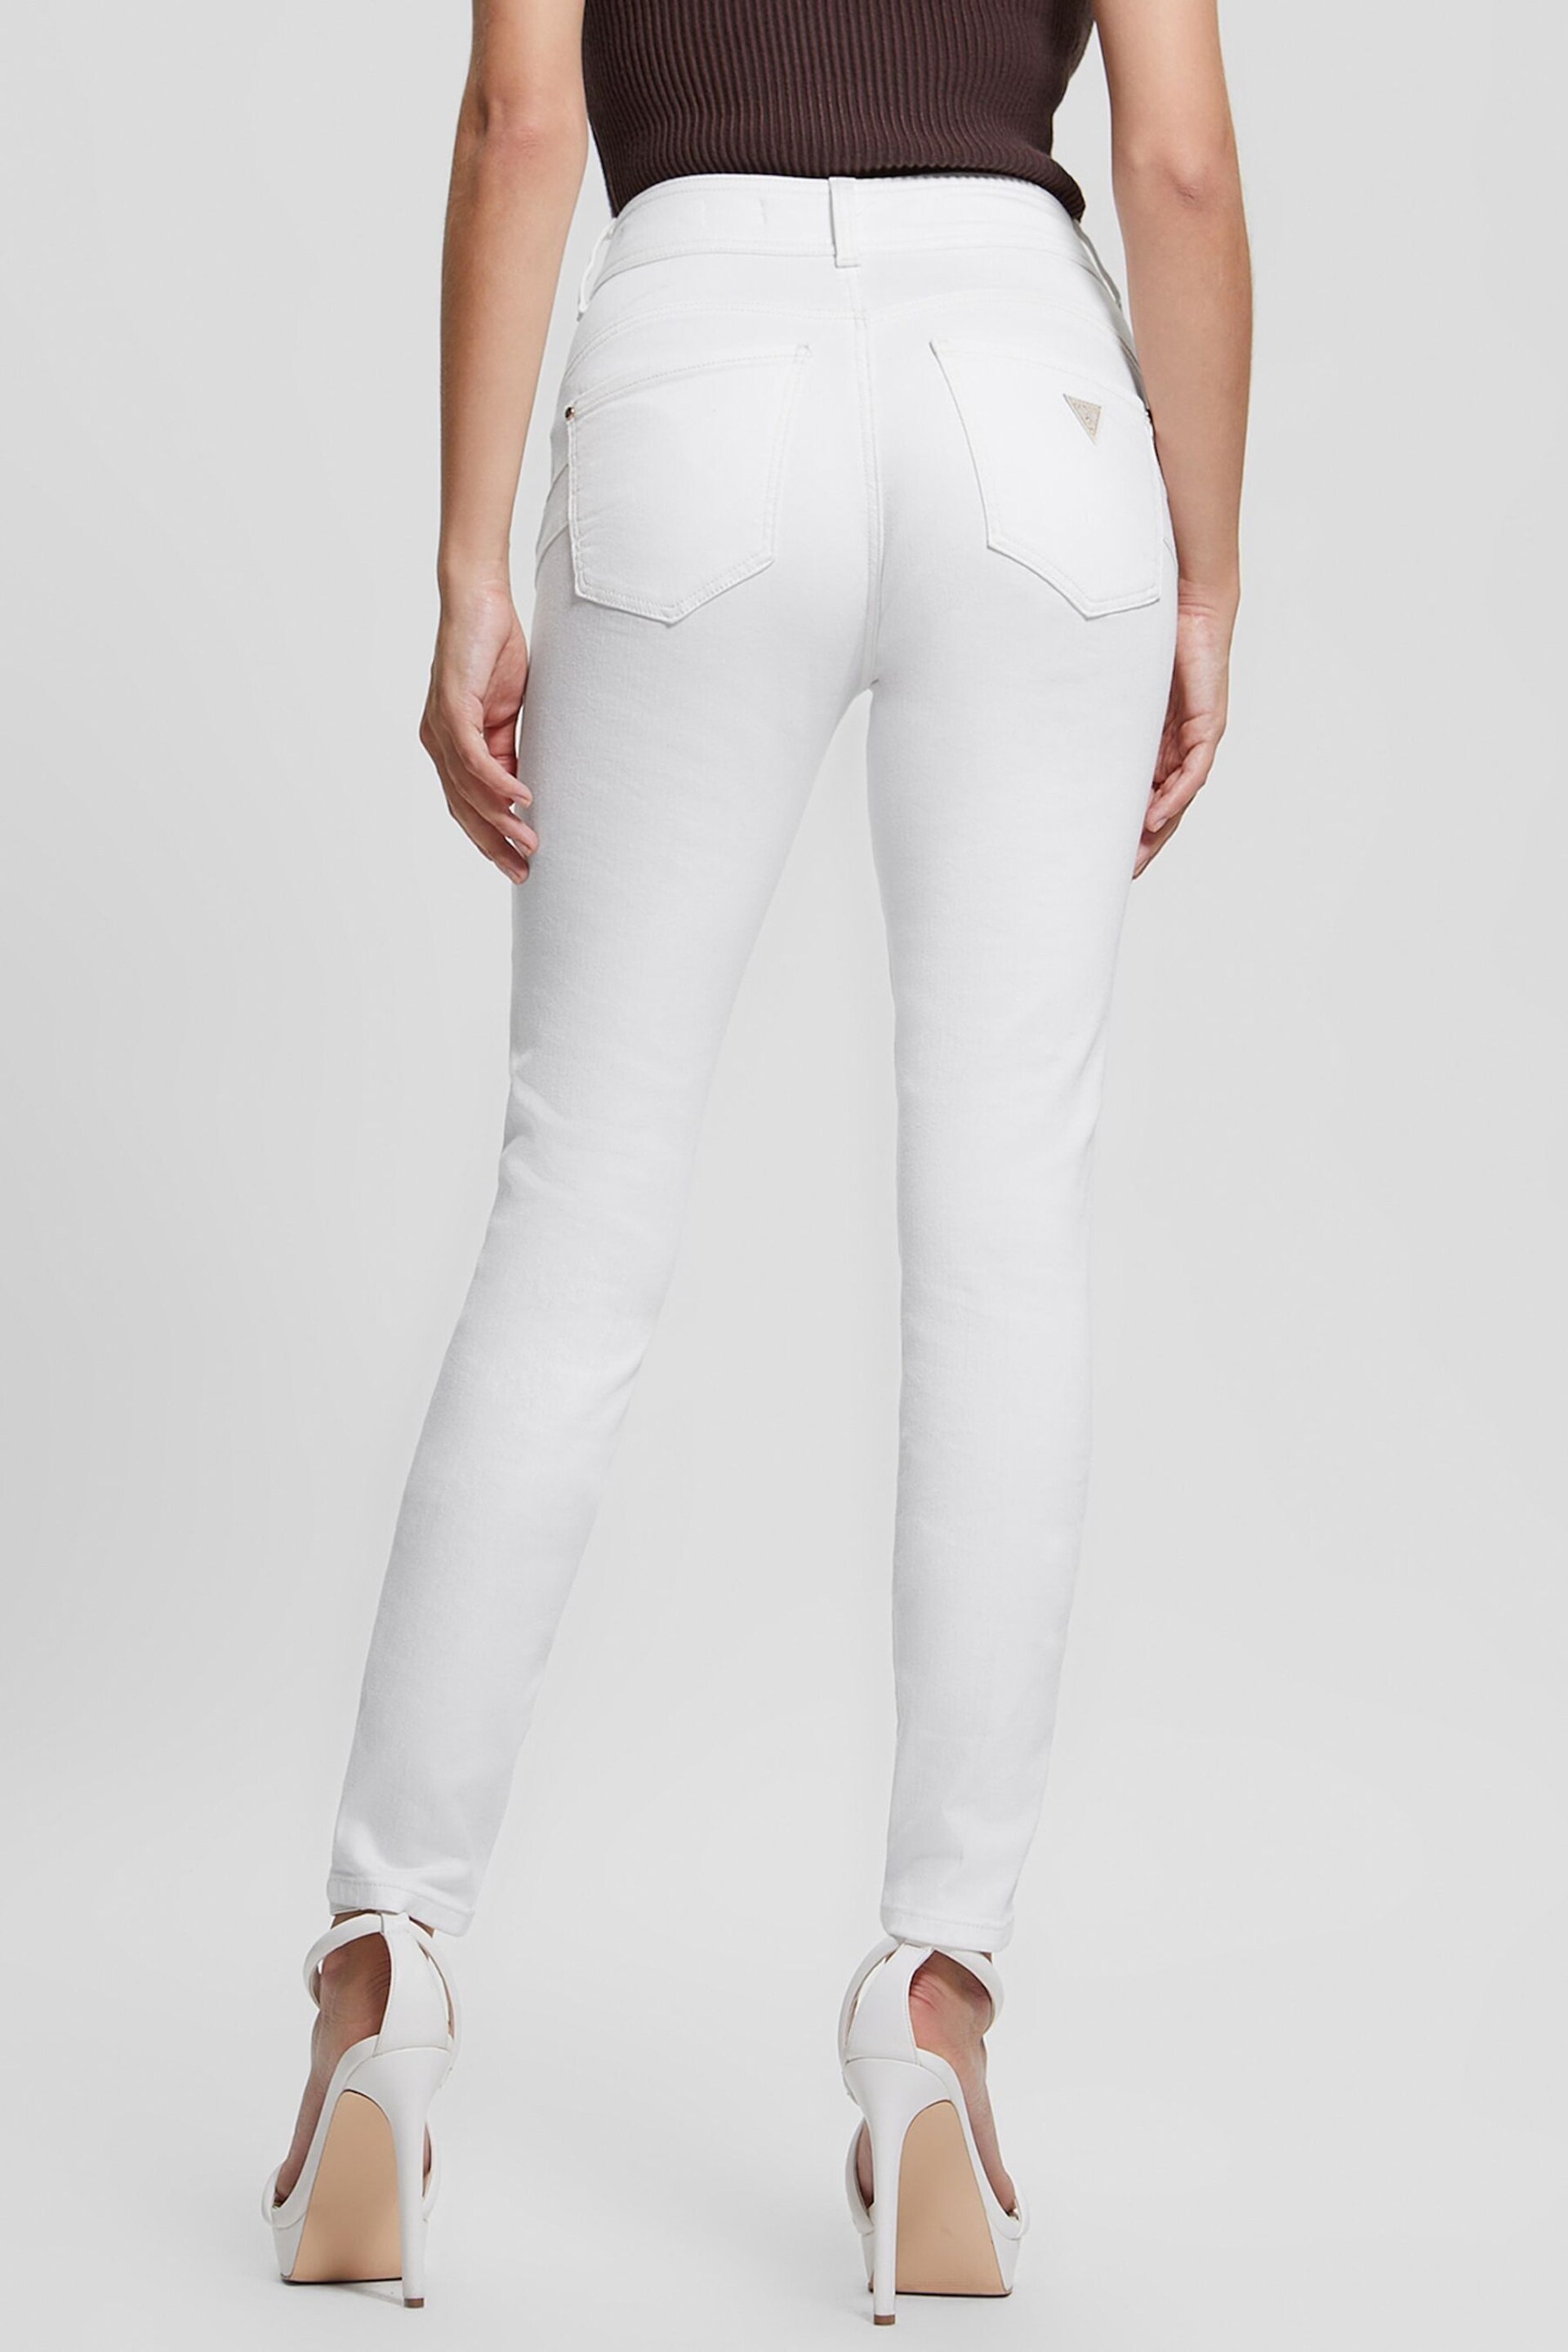 Guess White Shape Up Skinny Jeans - Image 2 of 7